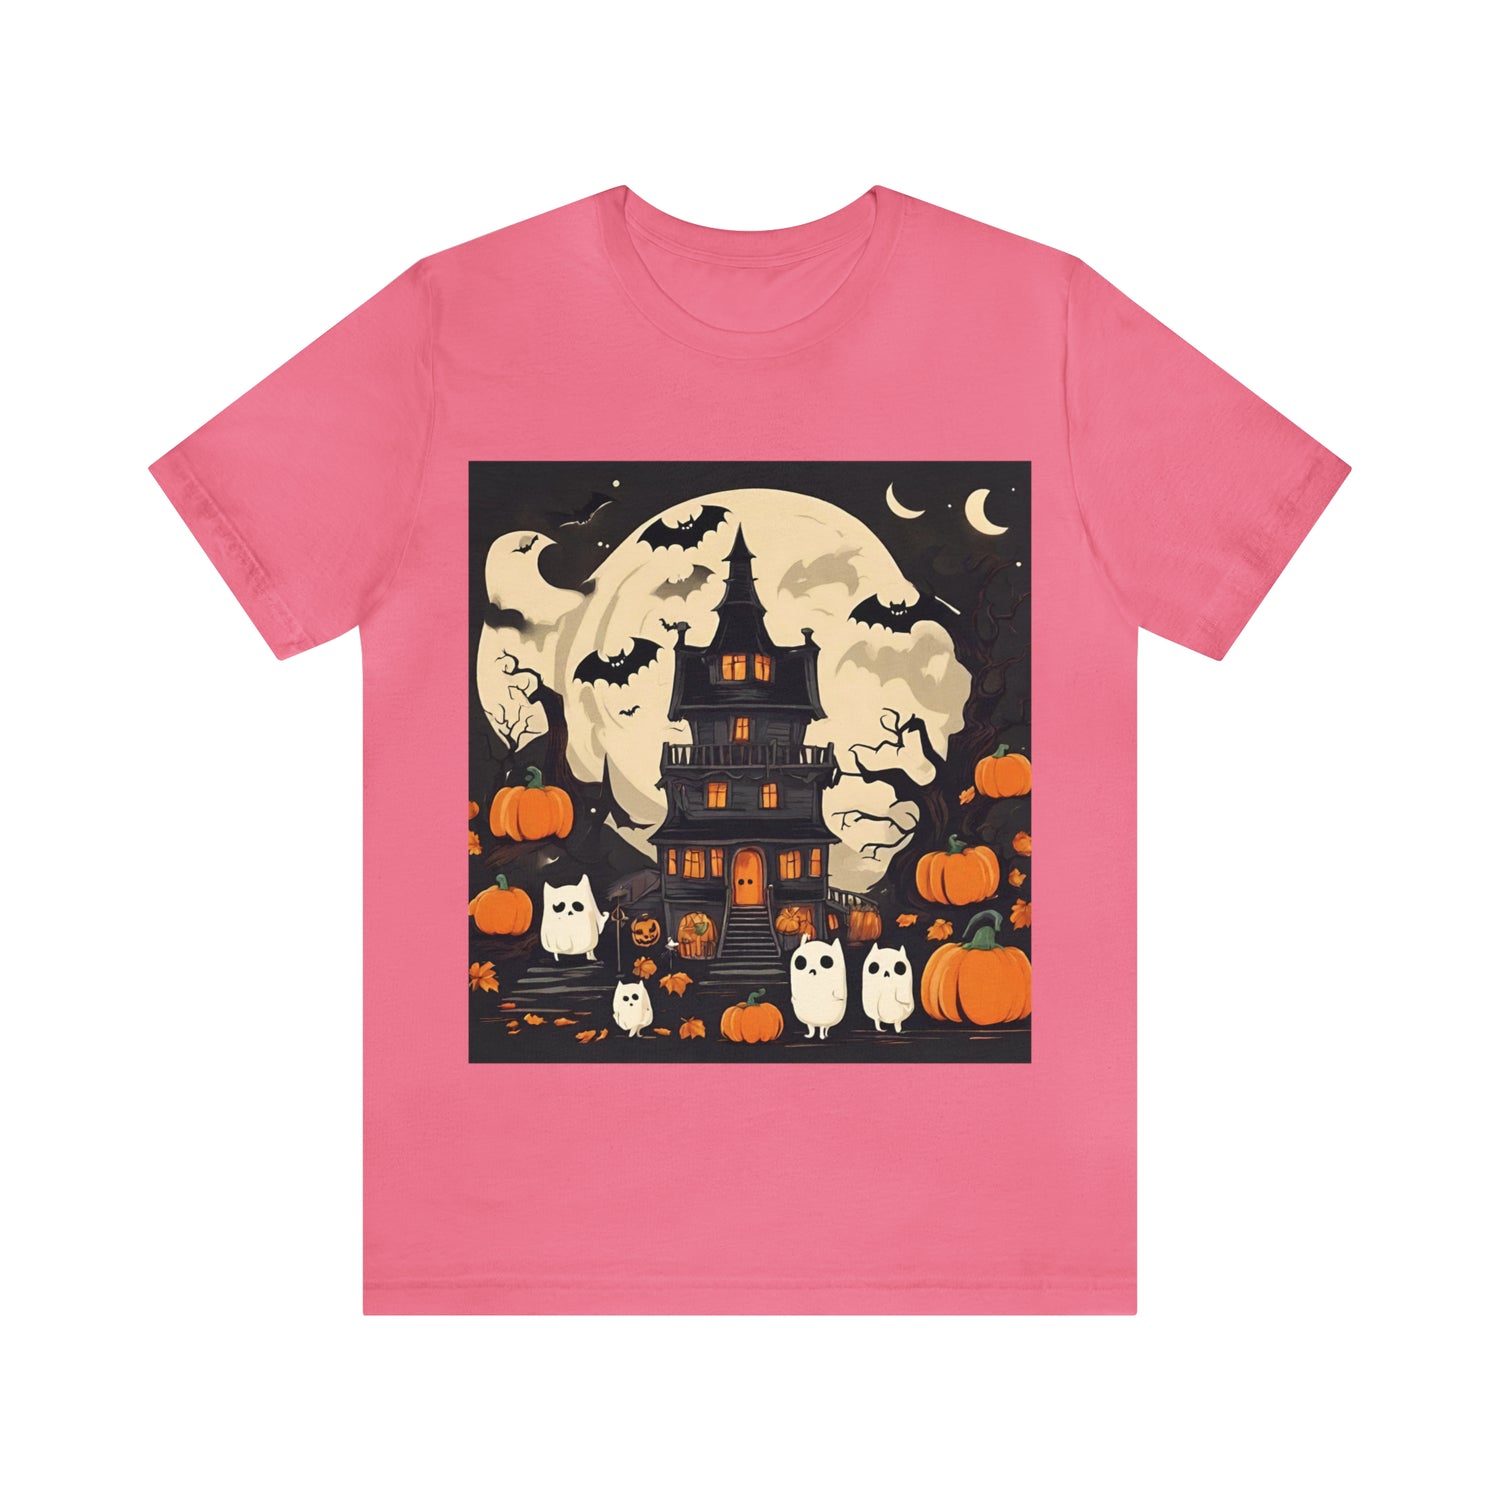 Halloween T-Shirt With Scary House | Halloween Gift Ideas Charity Pink T-Shirt Petrova Designs